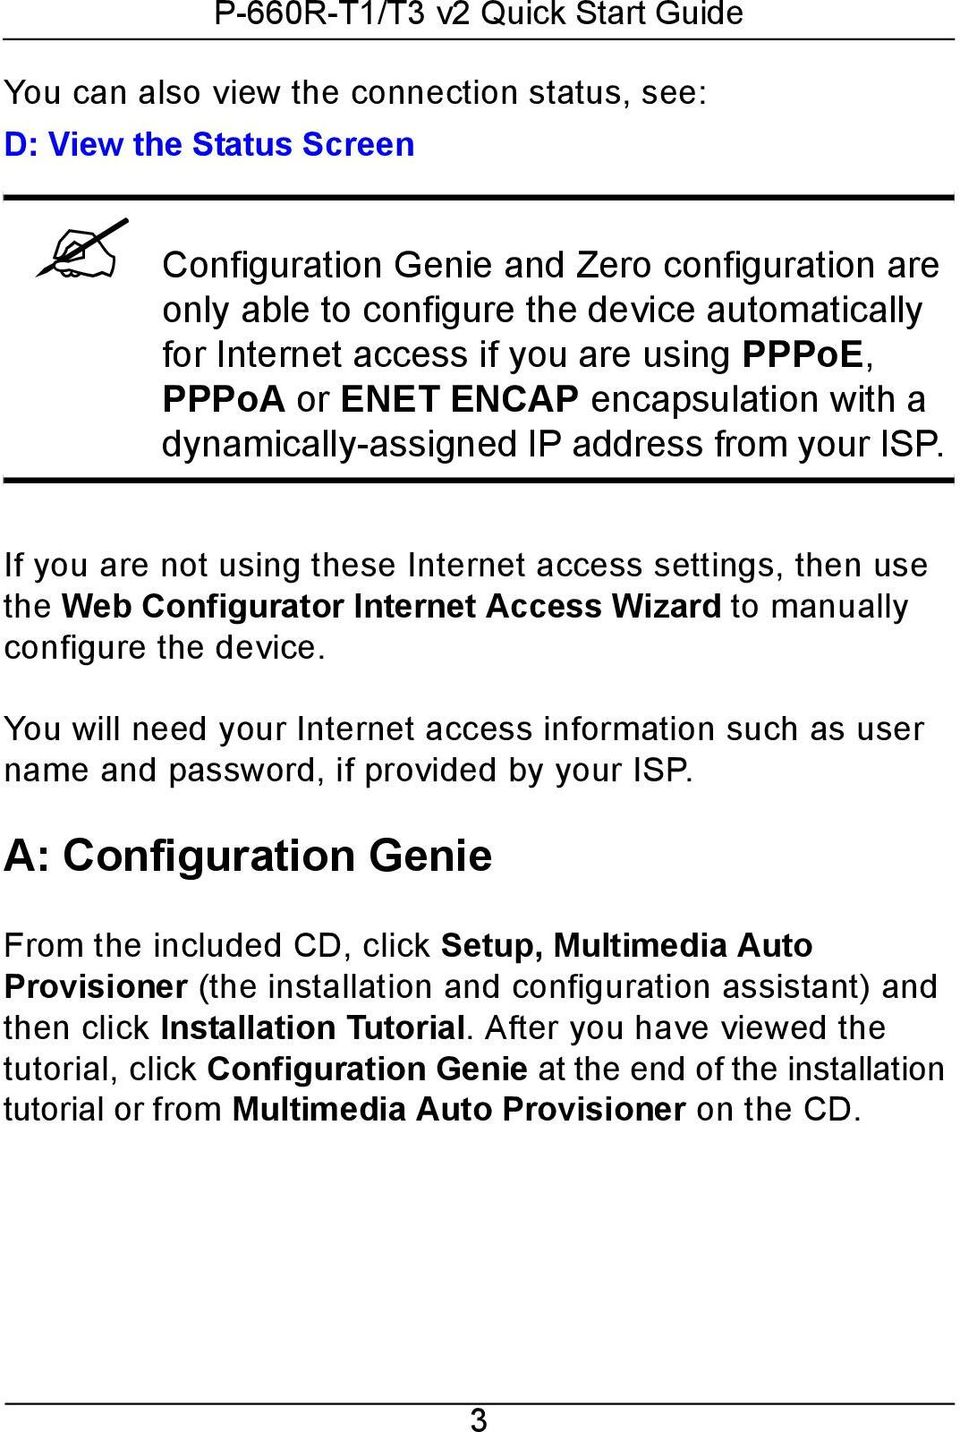 If you are not using these Internet access settings, then use the Web Configurator Internet Access Wizard to manually configure the device.